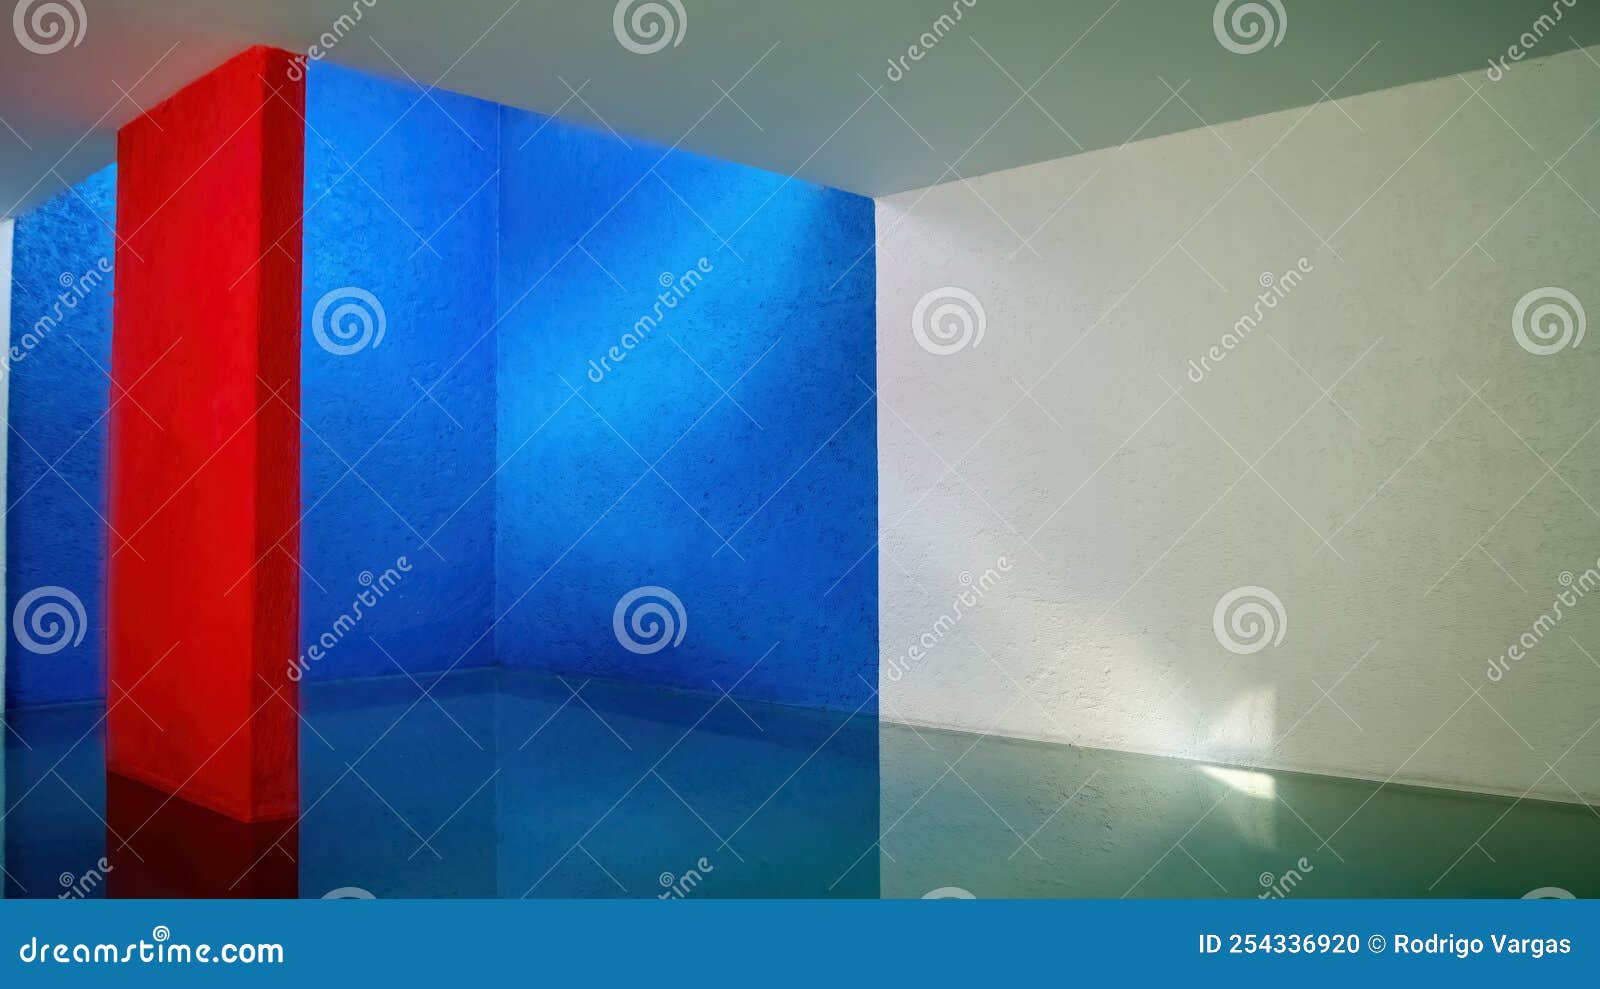 interior of the gilardi house of the famous architect luis barragan, pool reflecting the light, blue wall and red column